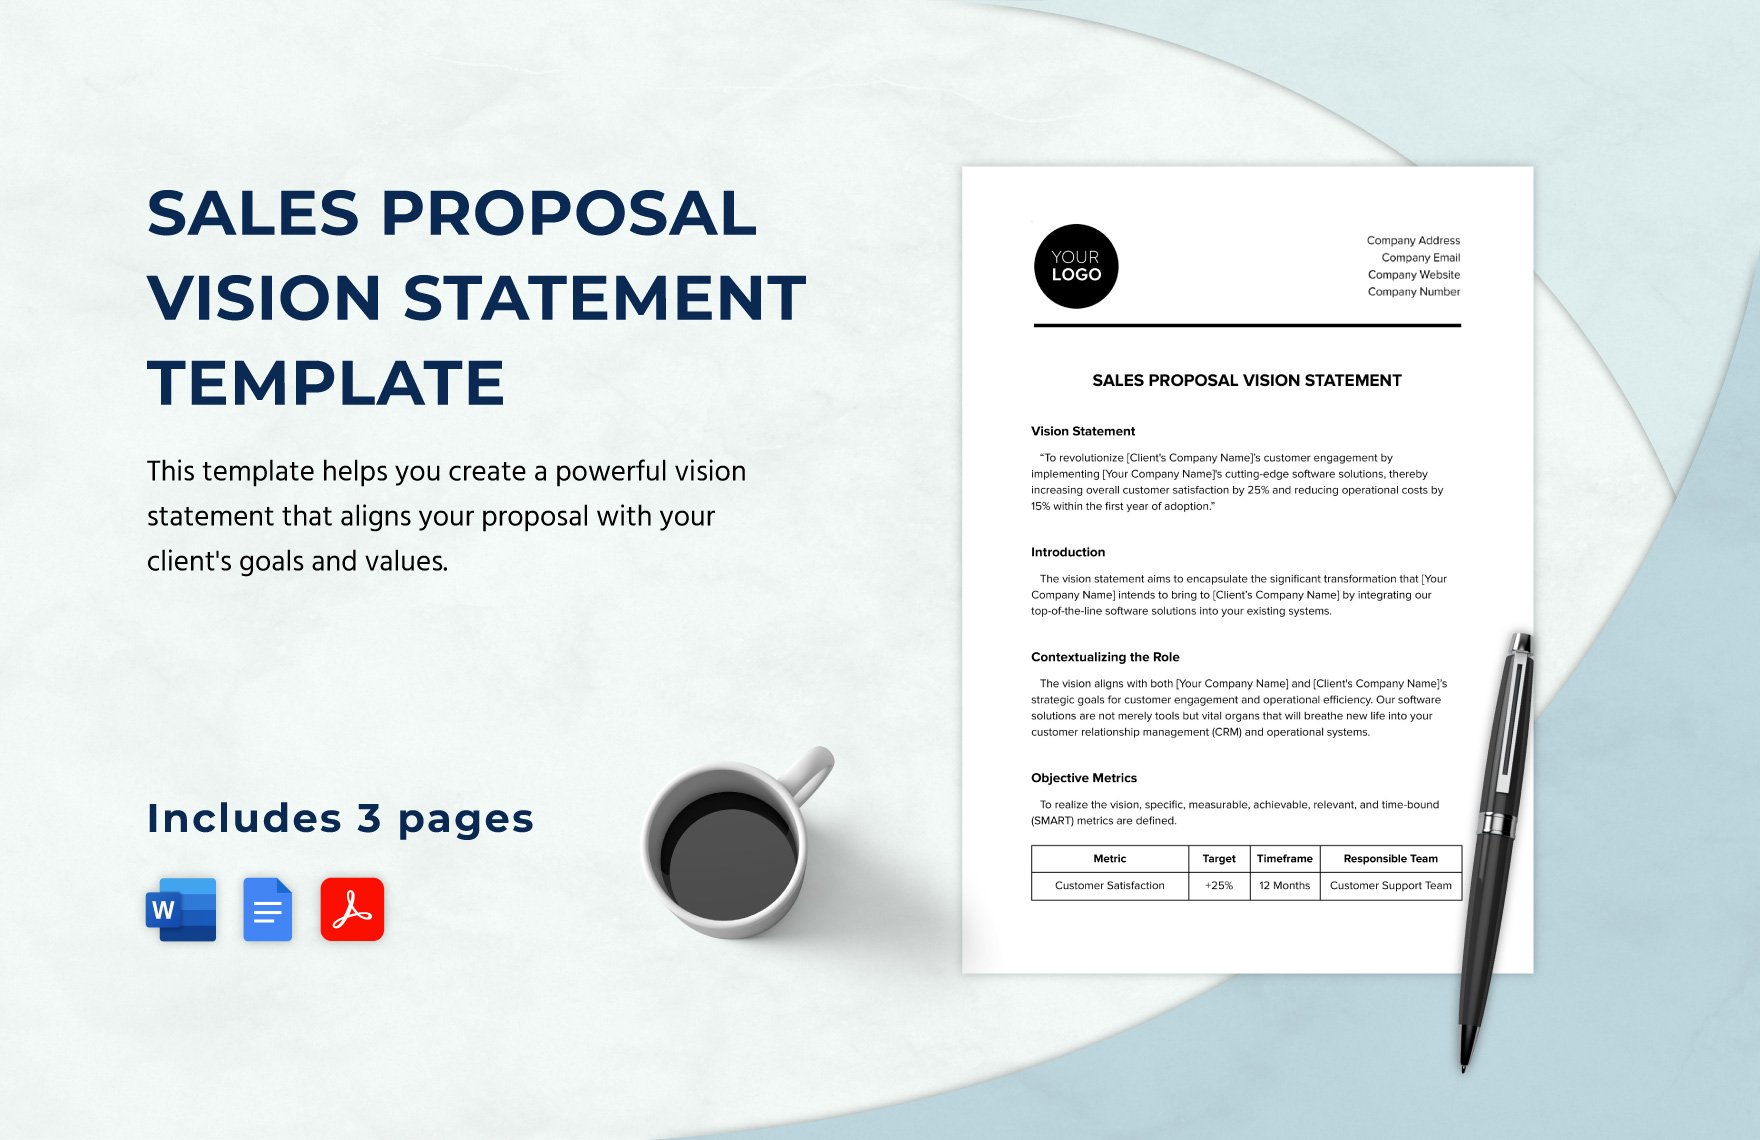 Sales Proposal Vision Statement Template in Word, Google Docs, PDF